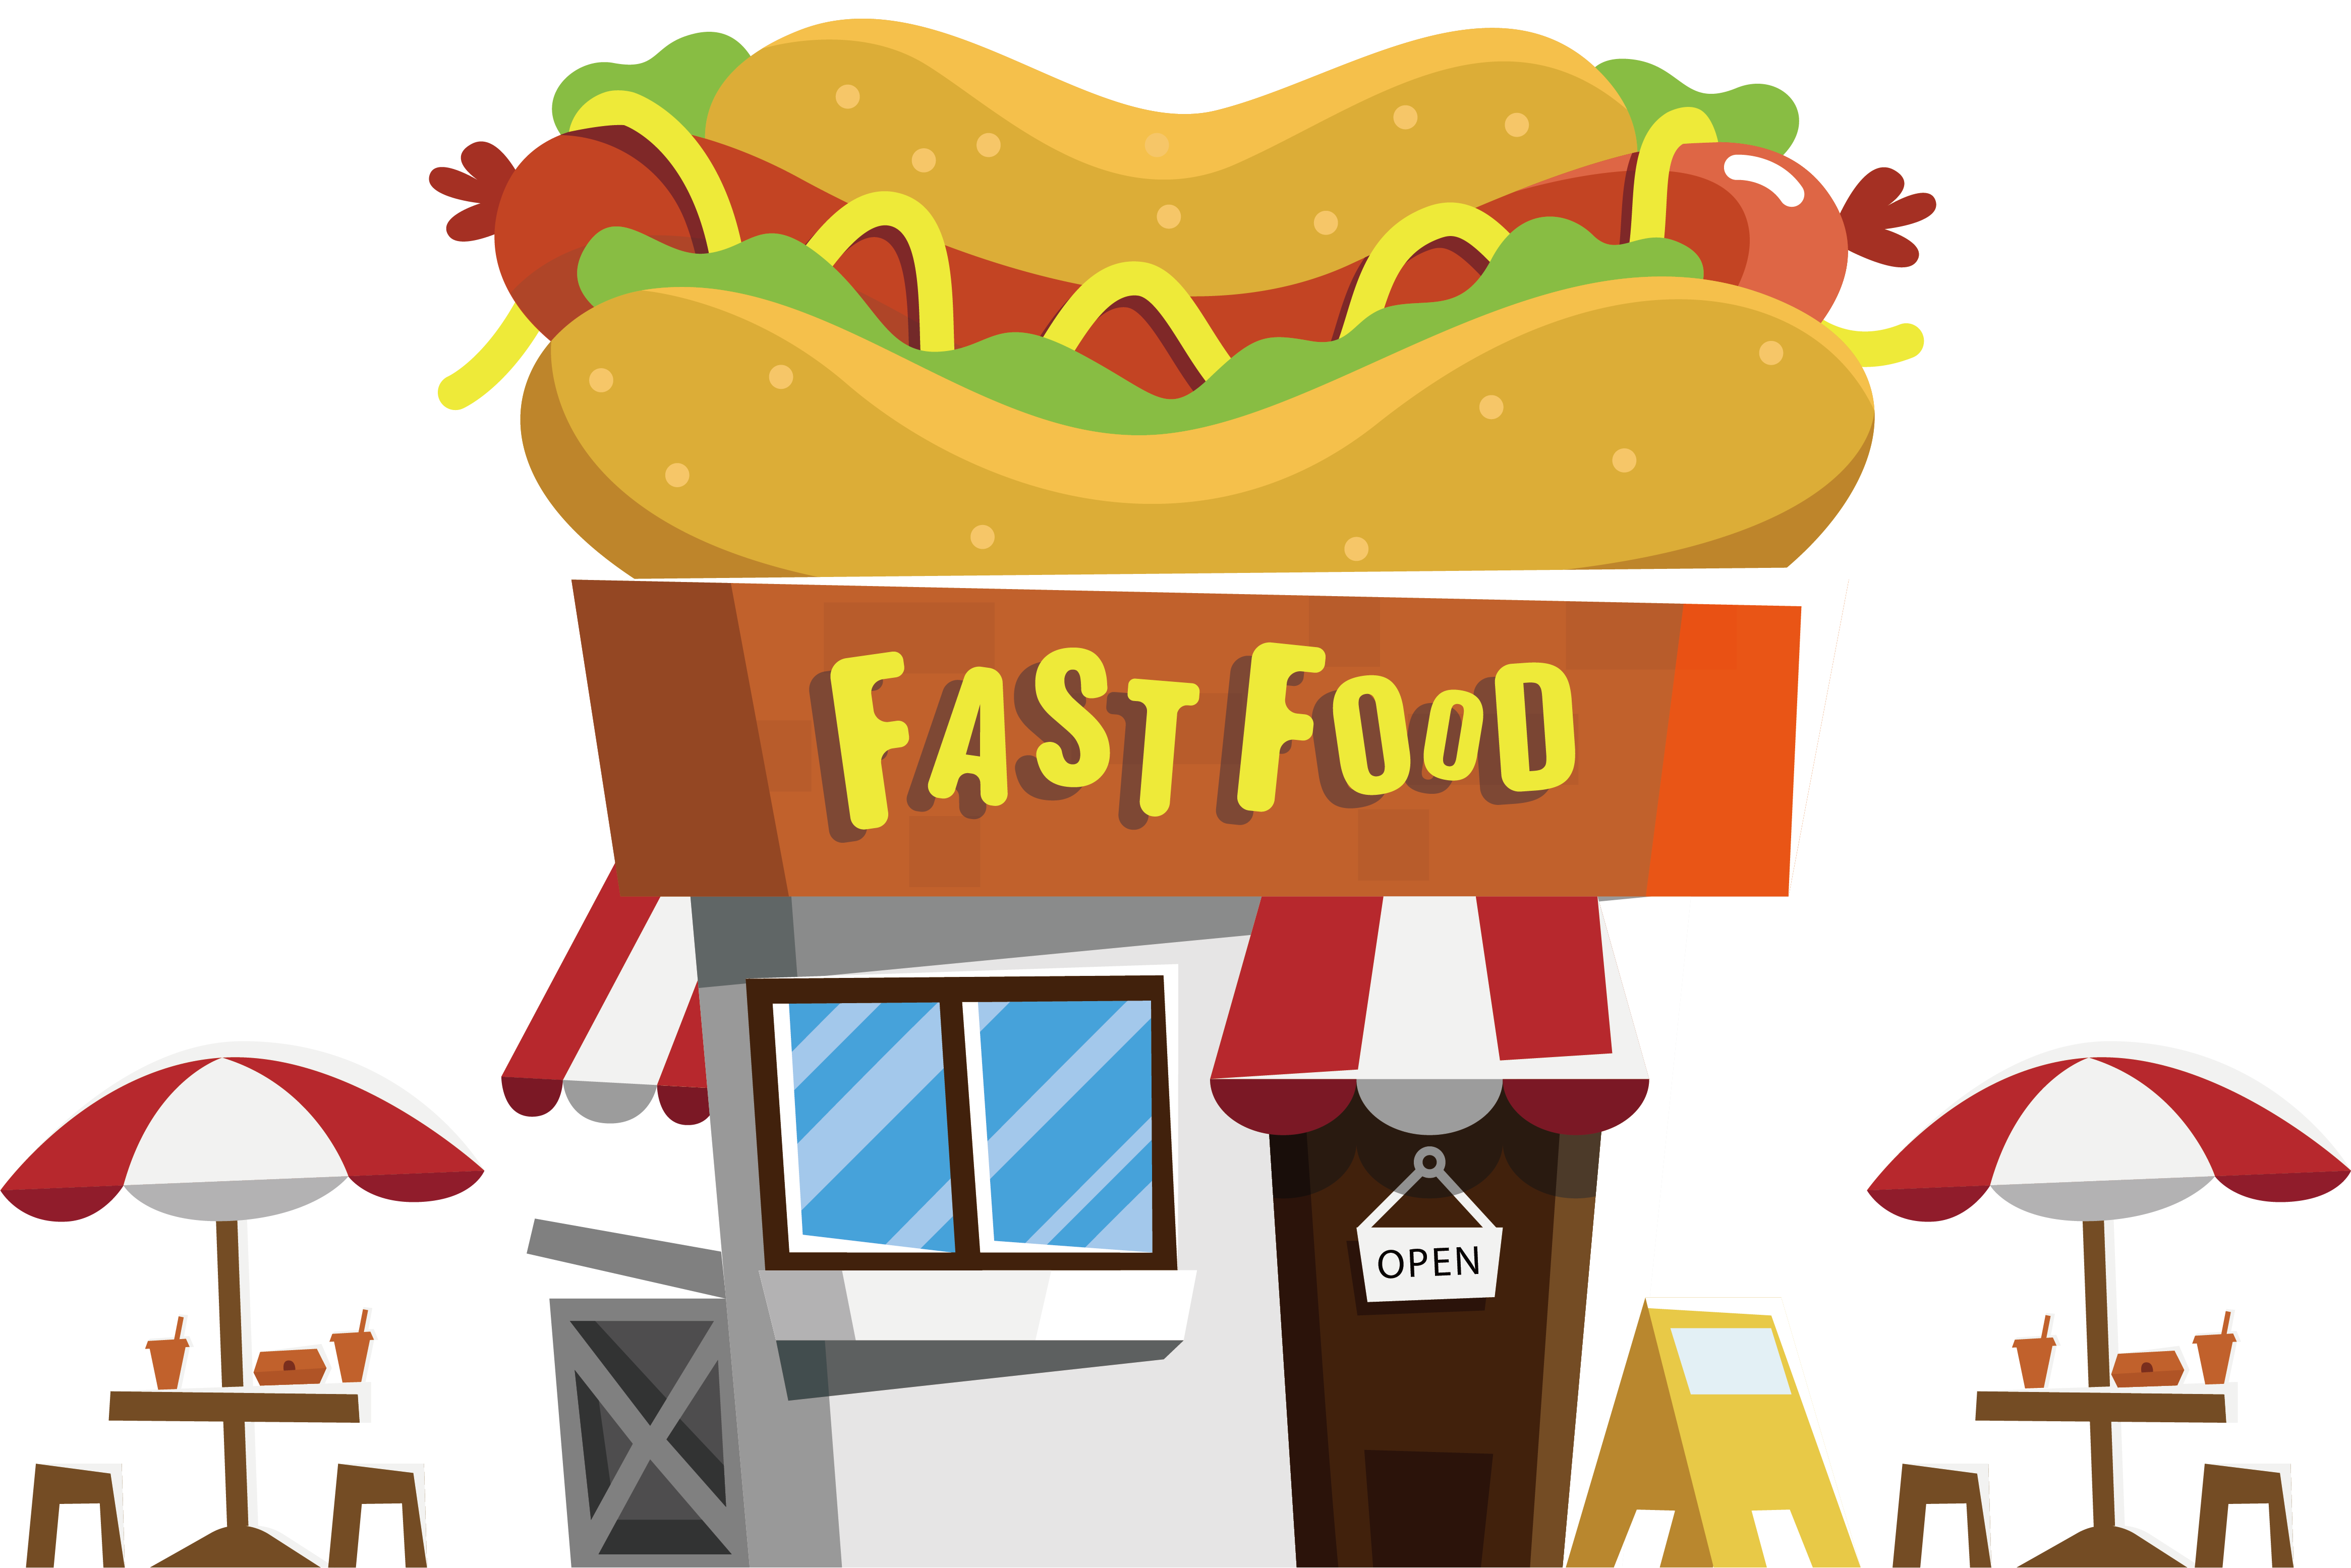 Hot dog fast food. Foods clipart snack